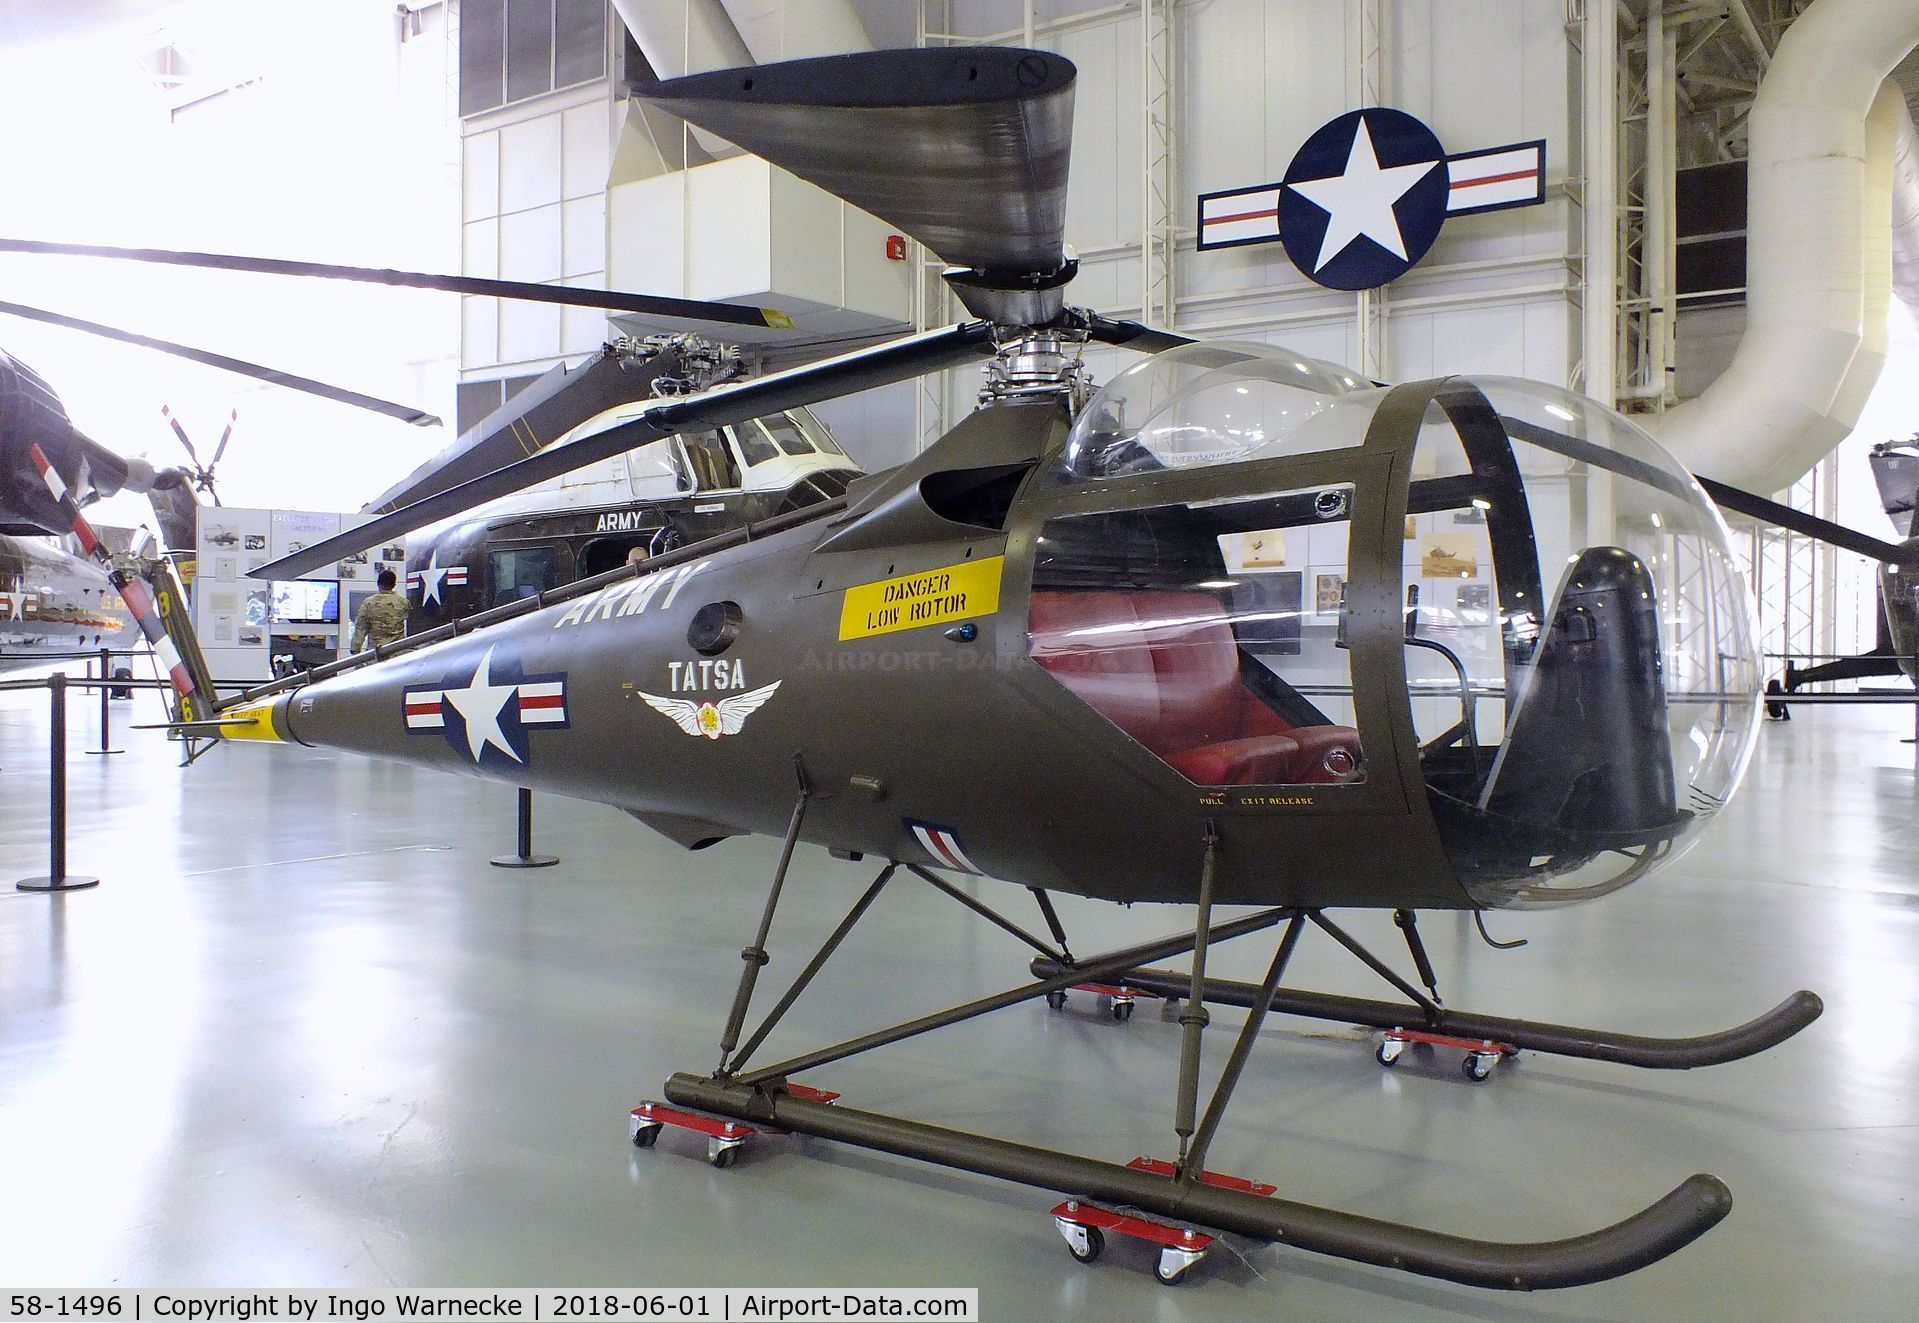 58-1496, Brantly YHO-3 C/N 63, Brantly YHO-3BR at the US Army Aviation Museum, Ft. Rucker